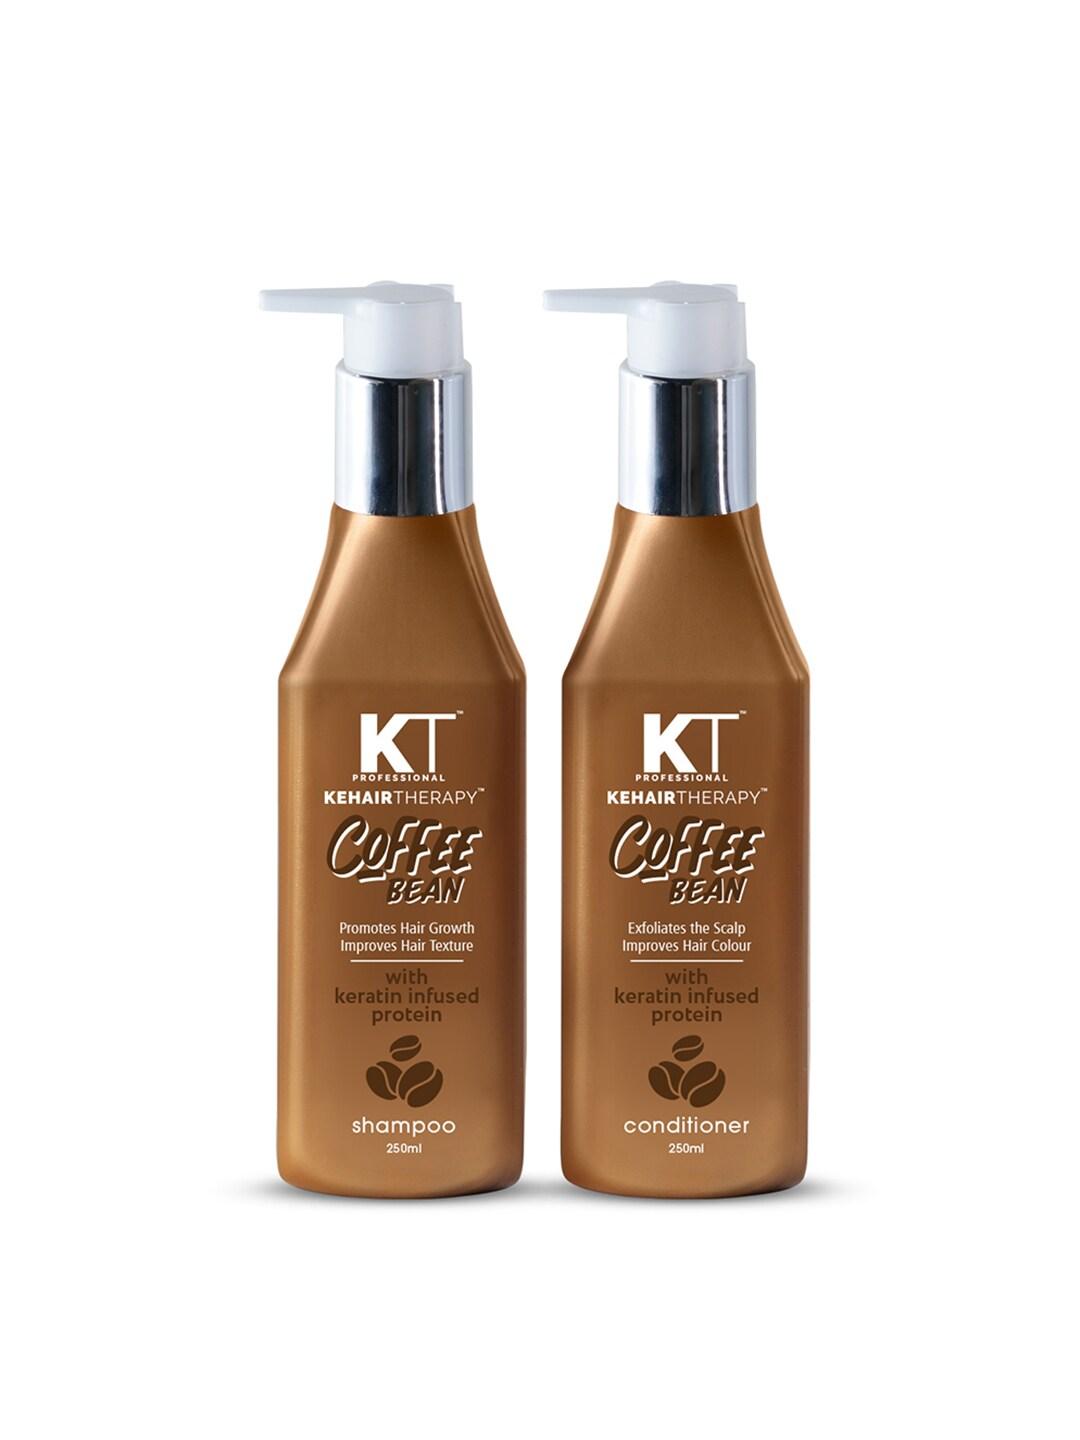 KEHAIRTHERAPY KT Professional Coffee Bean Shampoo & Conditioner 500 ml